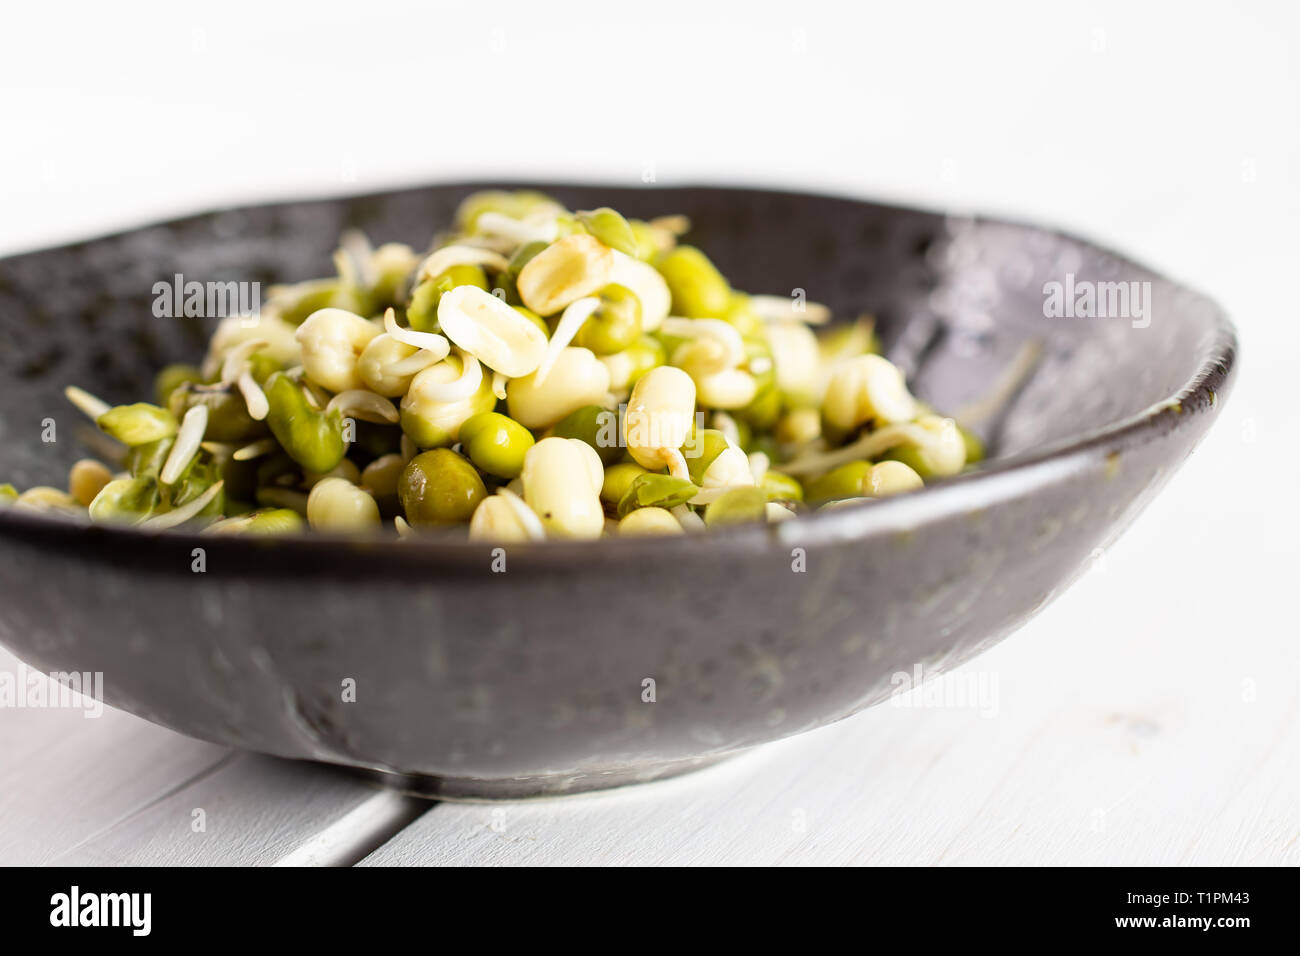 https://c8.alamy.com/comp/T1PM43/lot-of-whole-fresh-green-bean-sprouts-mungo-in-a-grey-ceramic-bowl-on-white-wood-T1PM43.jpg